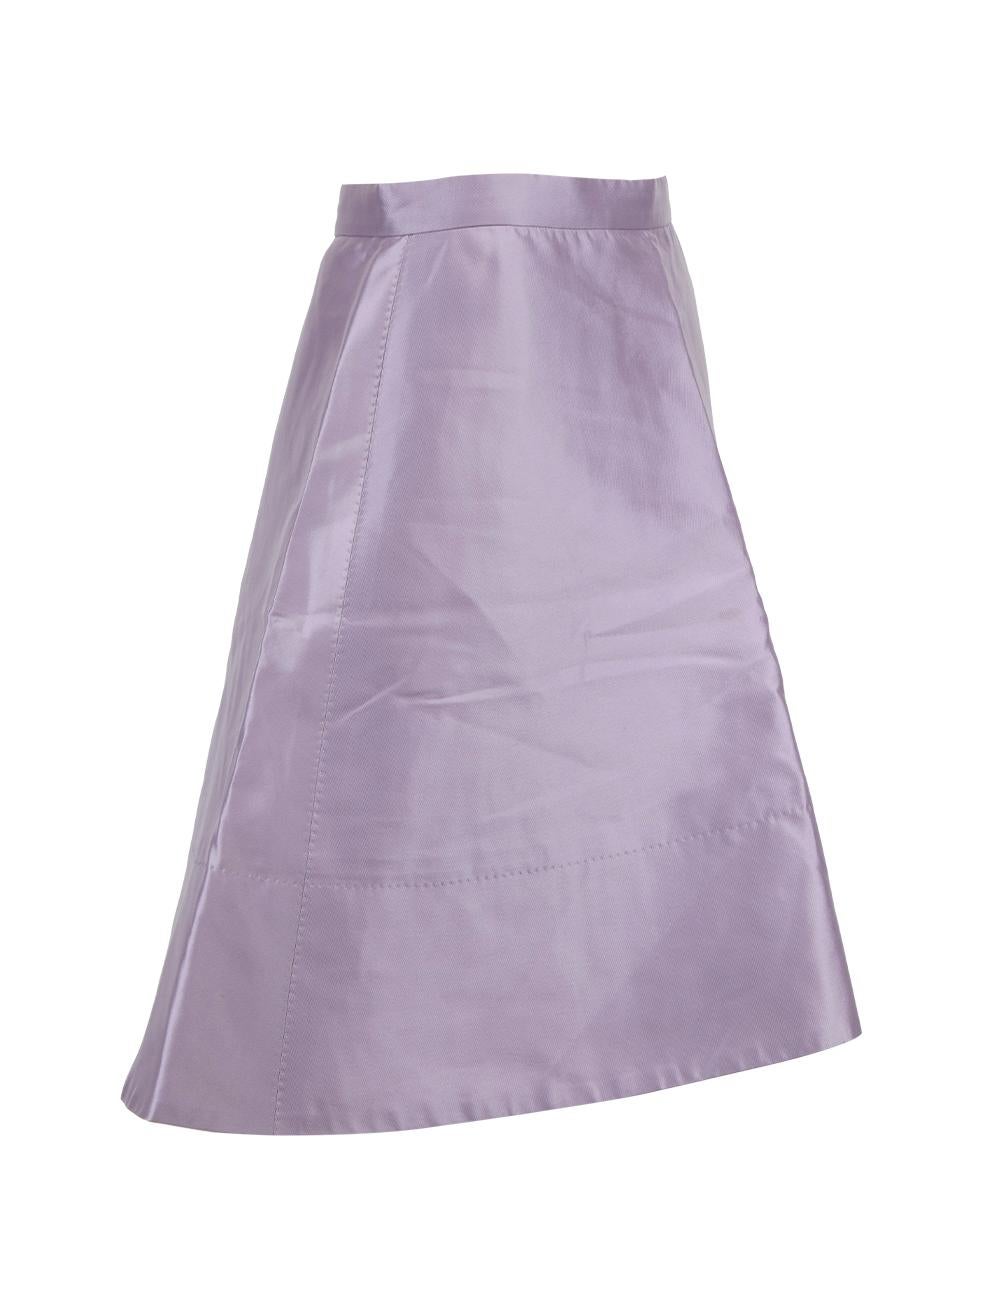 CONDITION is Very good. Minimal wear to skirt is evident. Minimal light marks and scuffs can be seen on this used Louis Vuitton designer resale item. Details Purple Satin Skirt Mini length Flared skater style Side zip fastening with snap button,